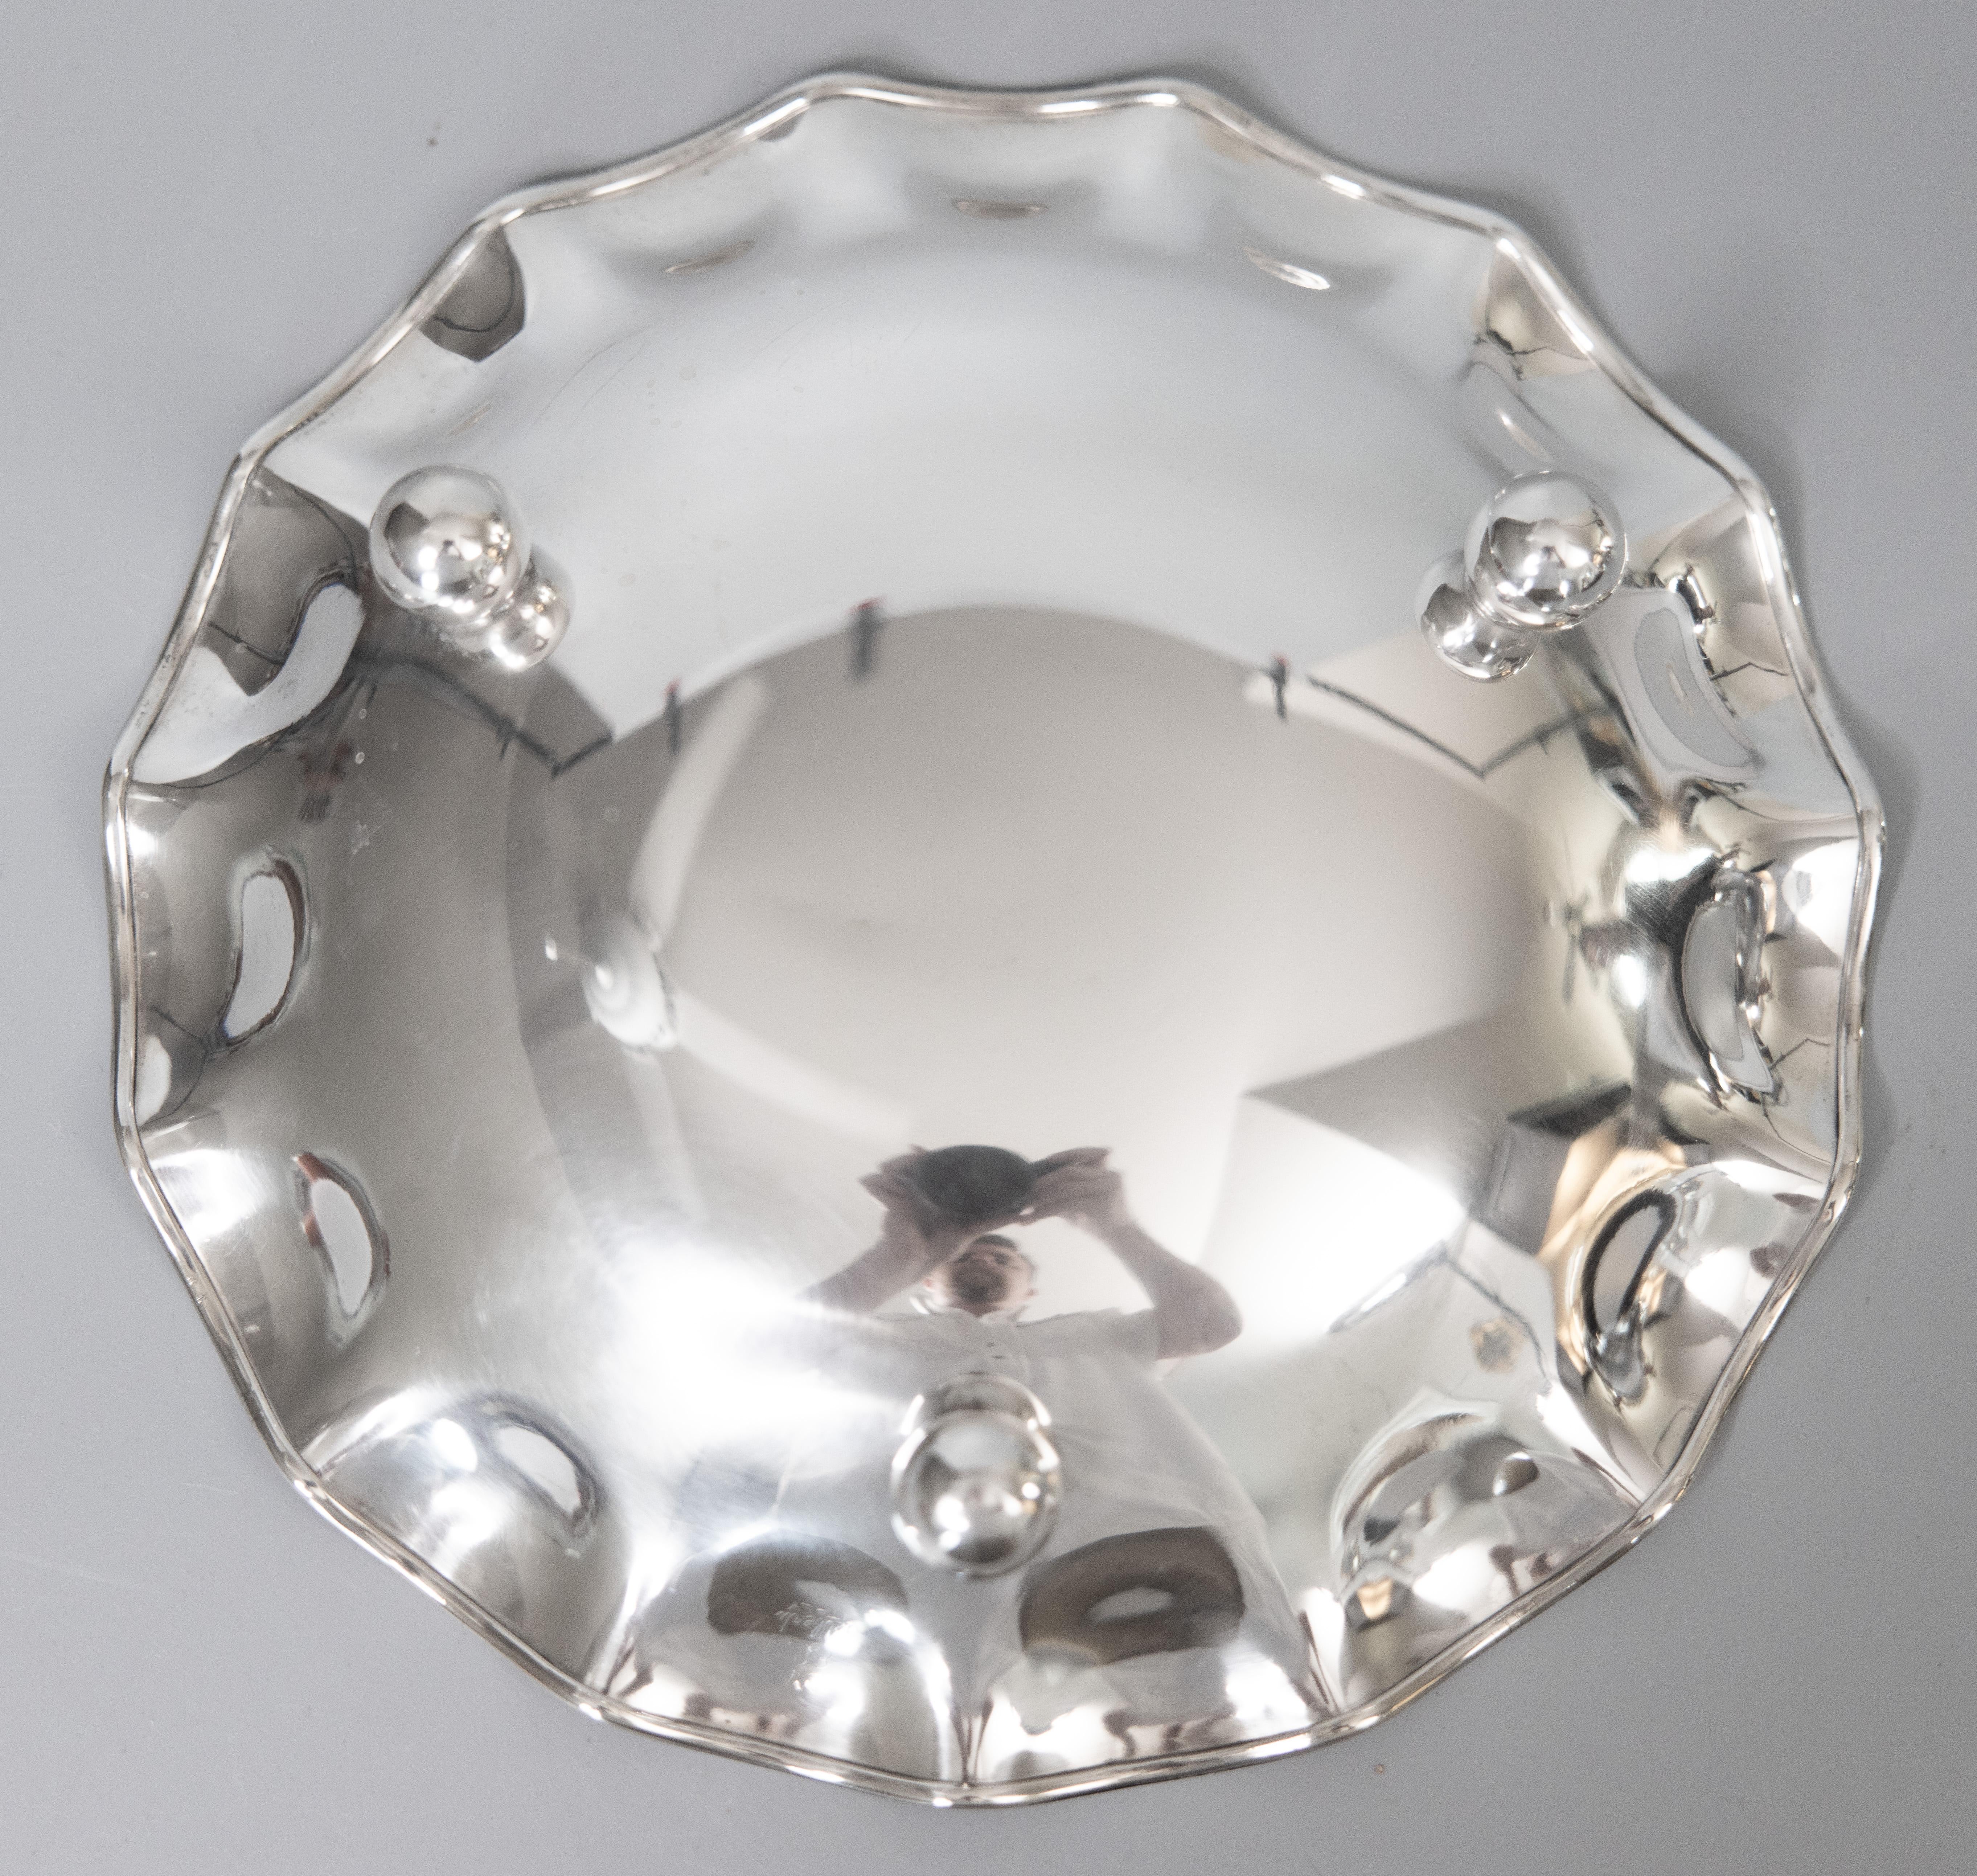 Mid-20th Century Italian Silver Plate Footed Scalloped Tray or Shallow Bowl For Sale 1